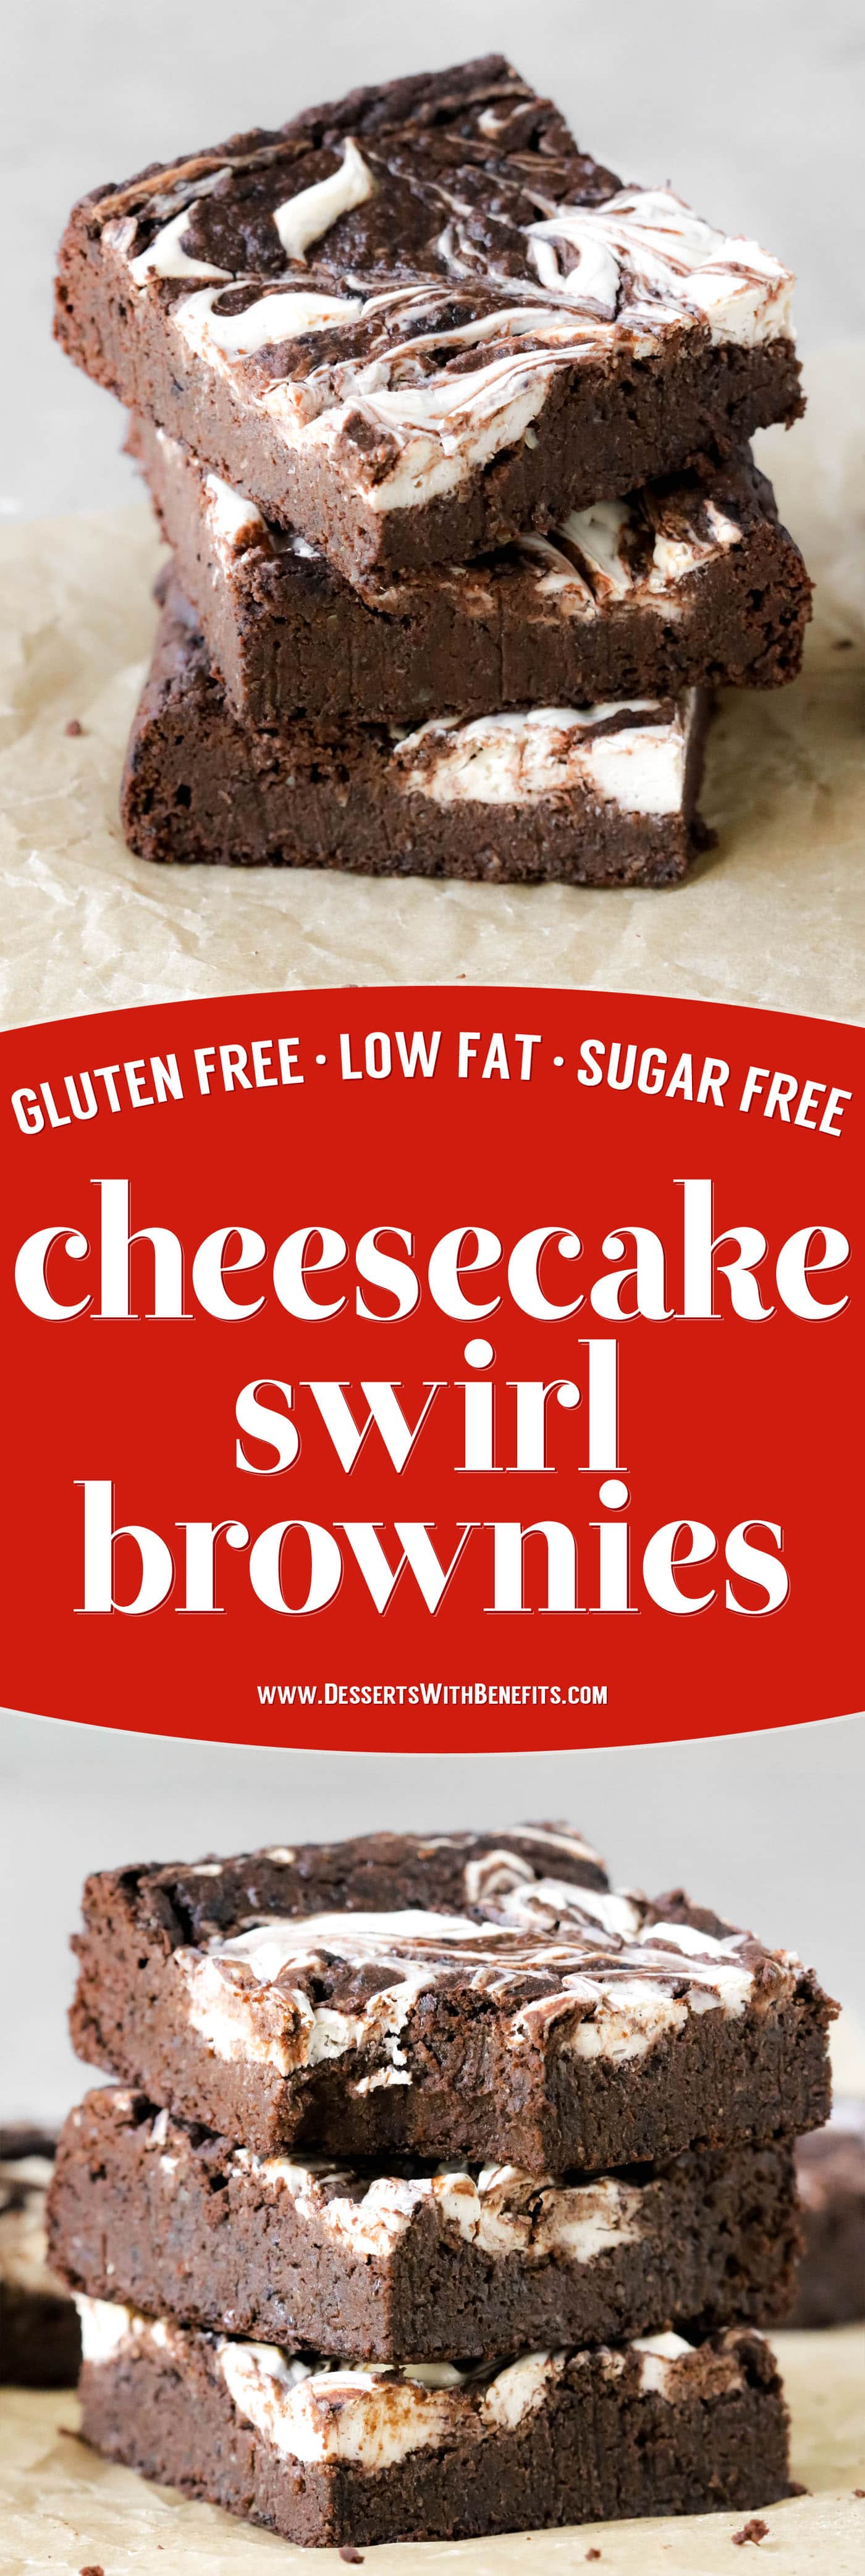 These Cheesecake Swirl Brownies are fudgy, dense, and chocolatey. And they're gluten free, sugar free, high fiber, and high protein too!